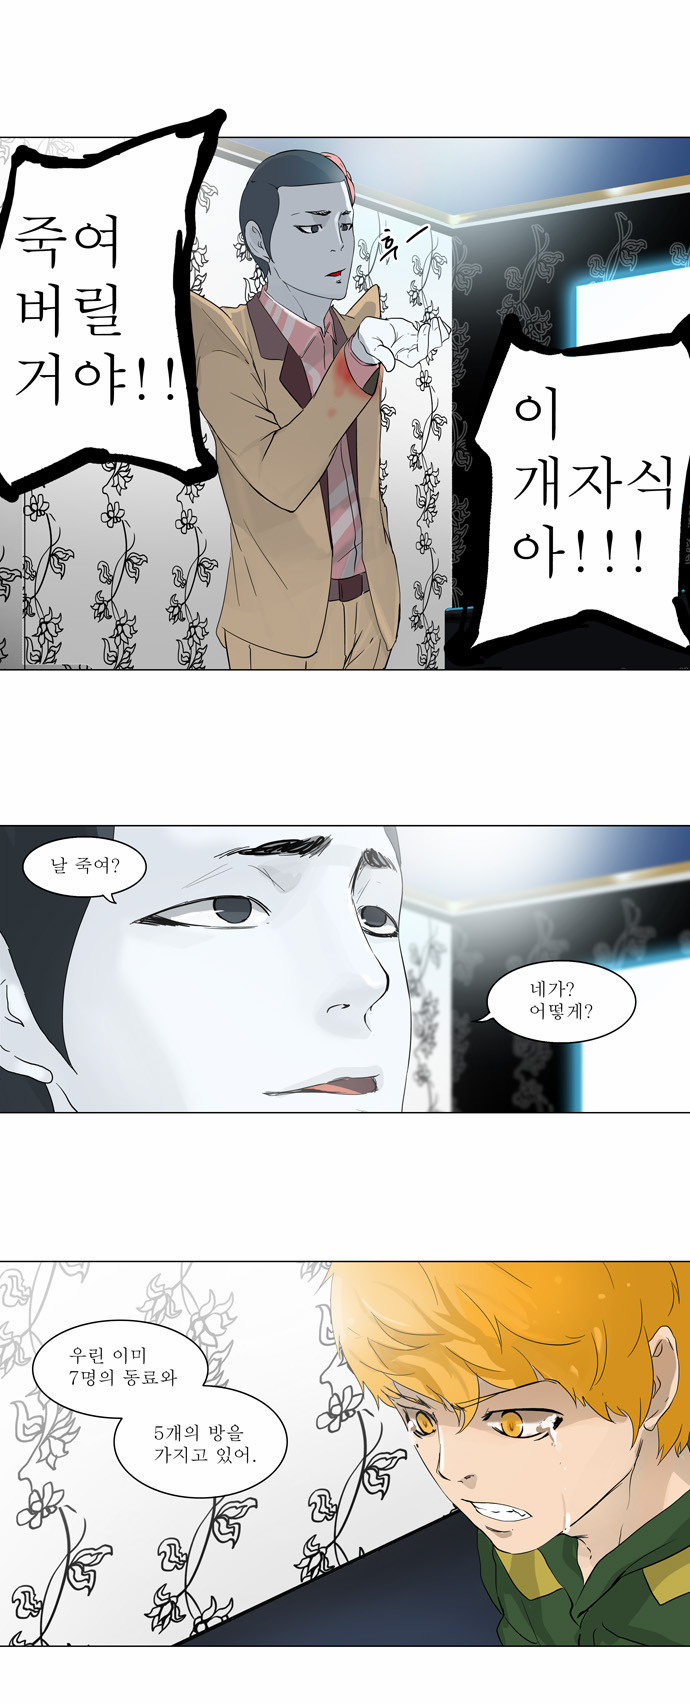 Tower of God - Chapter 100 - Page 1